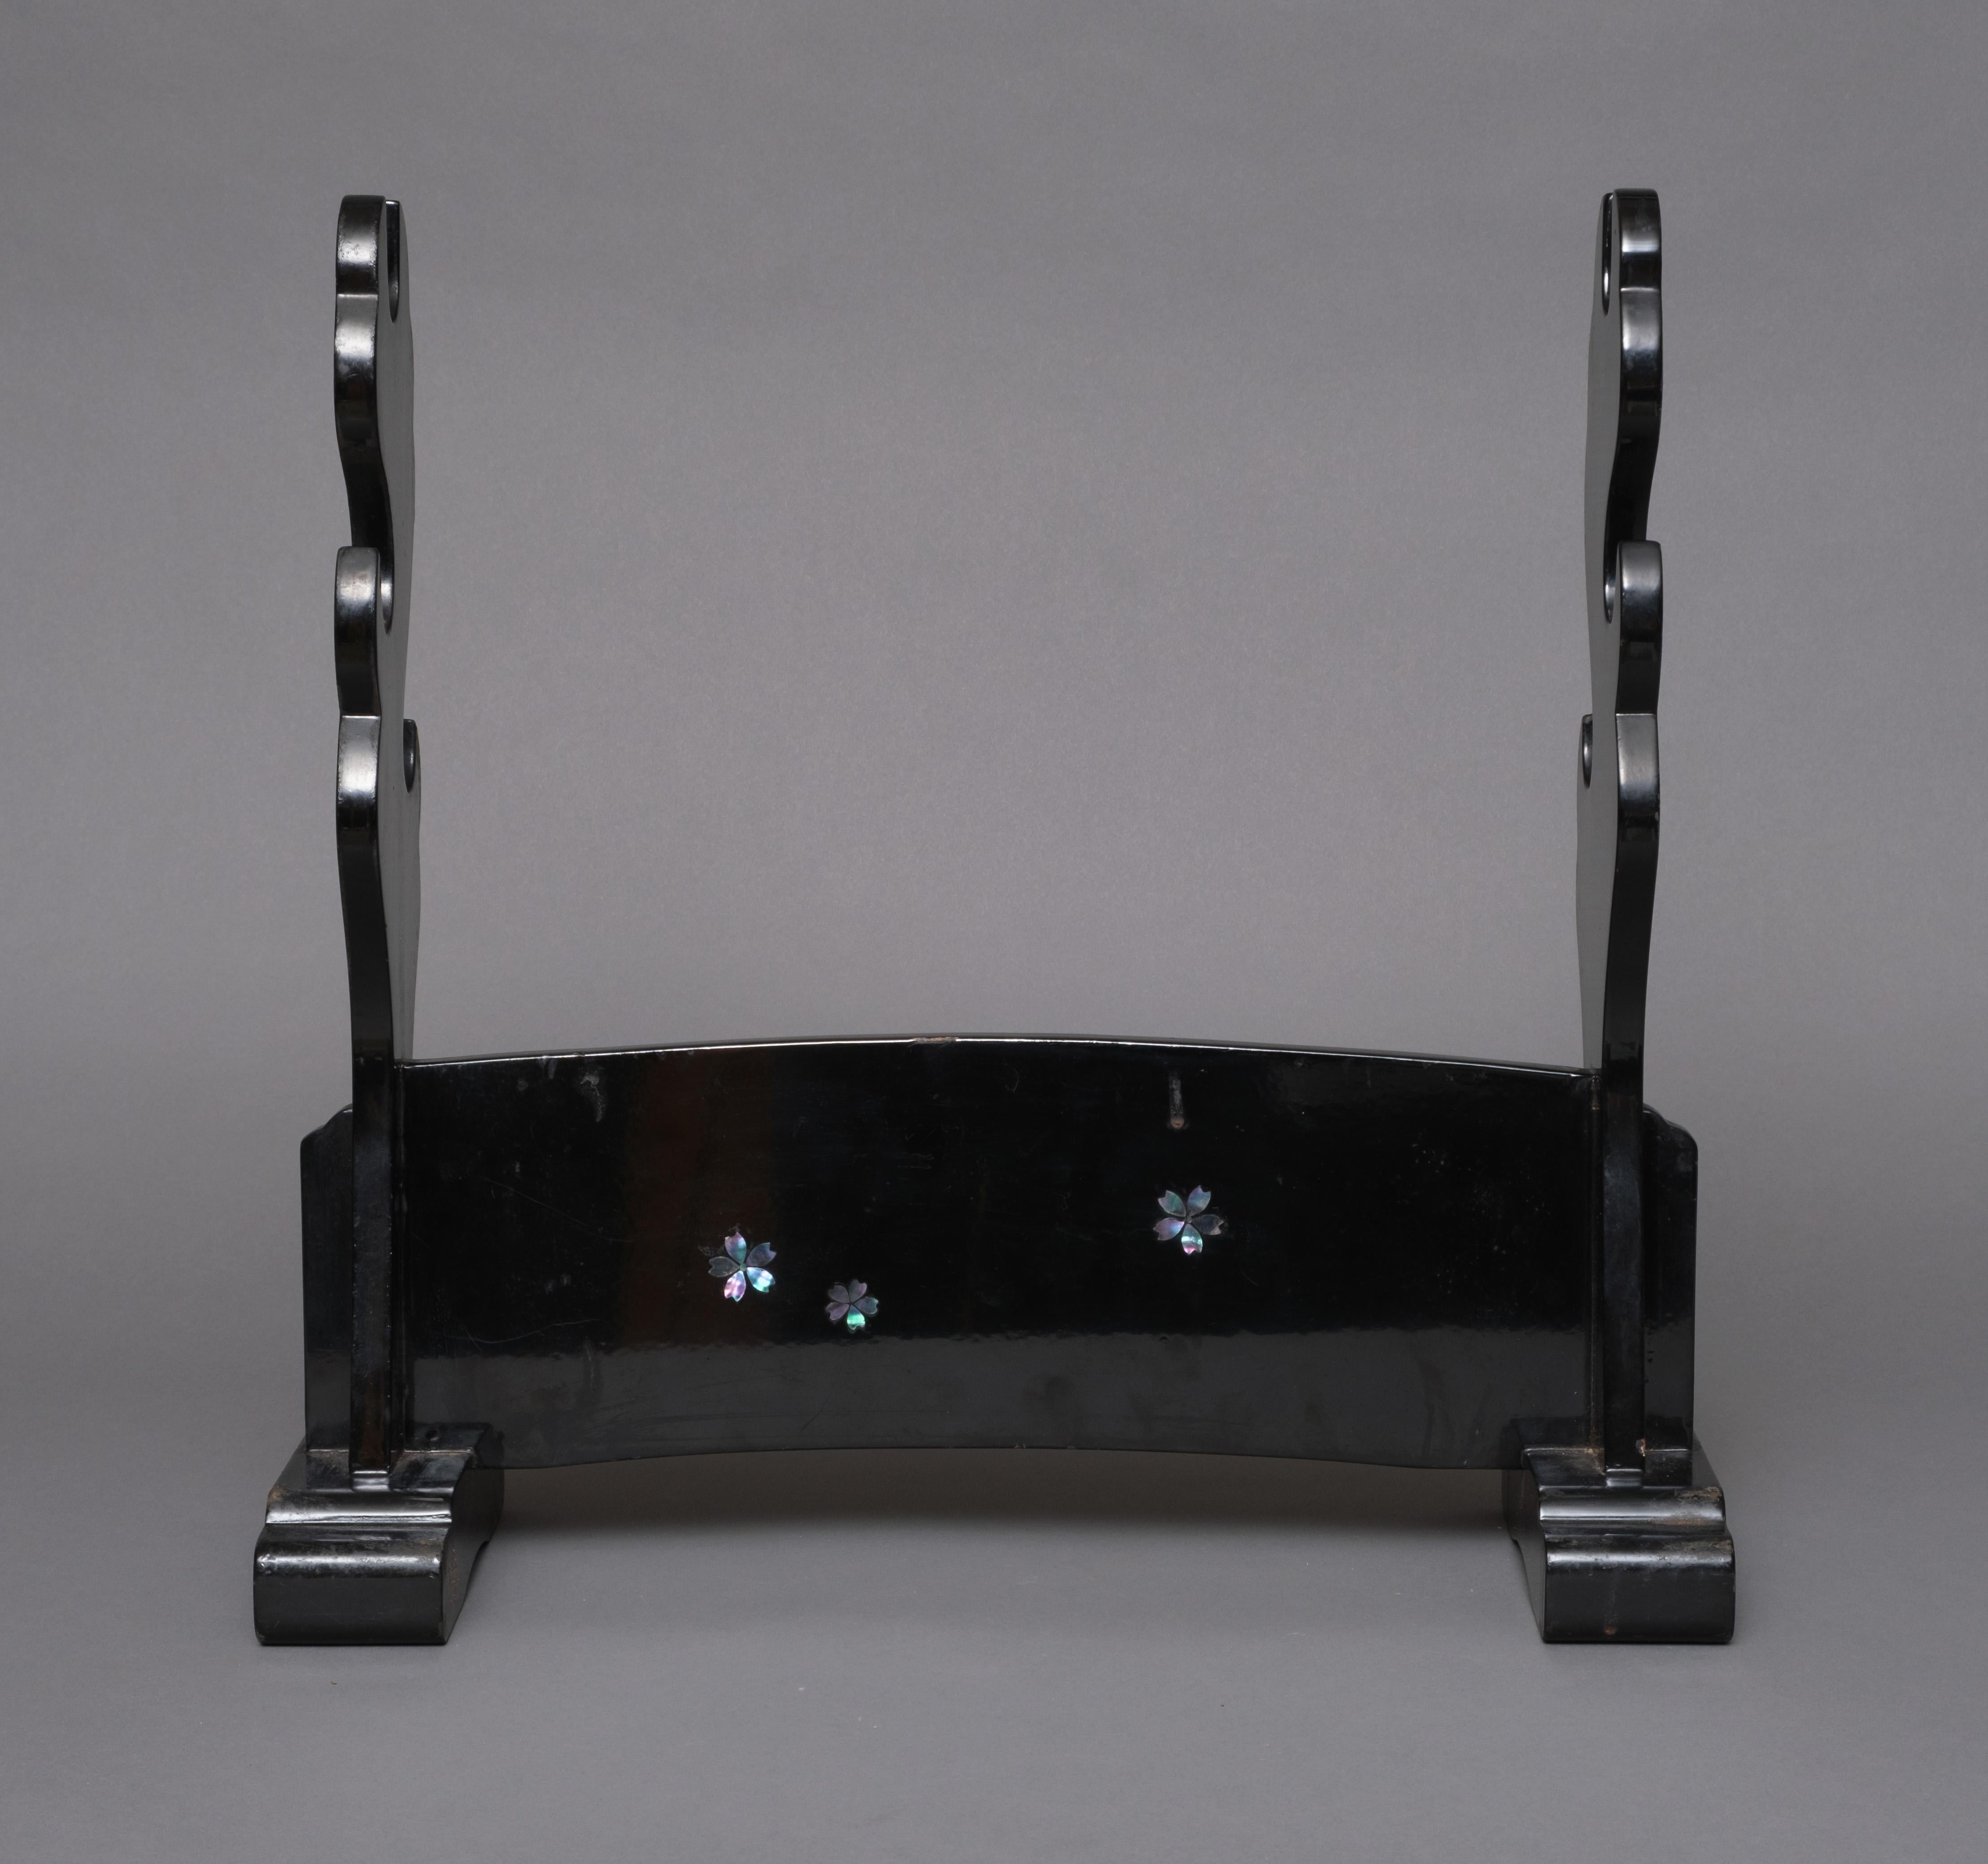 Mother-of-Pearl Japanese black lacquered sword stand 刀掛け (katana’kake) with raden inlay For Sale